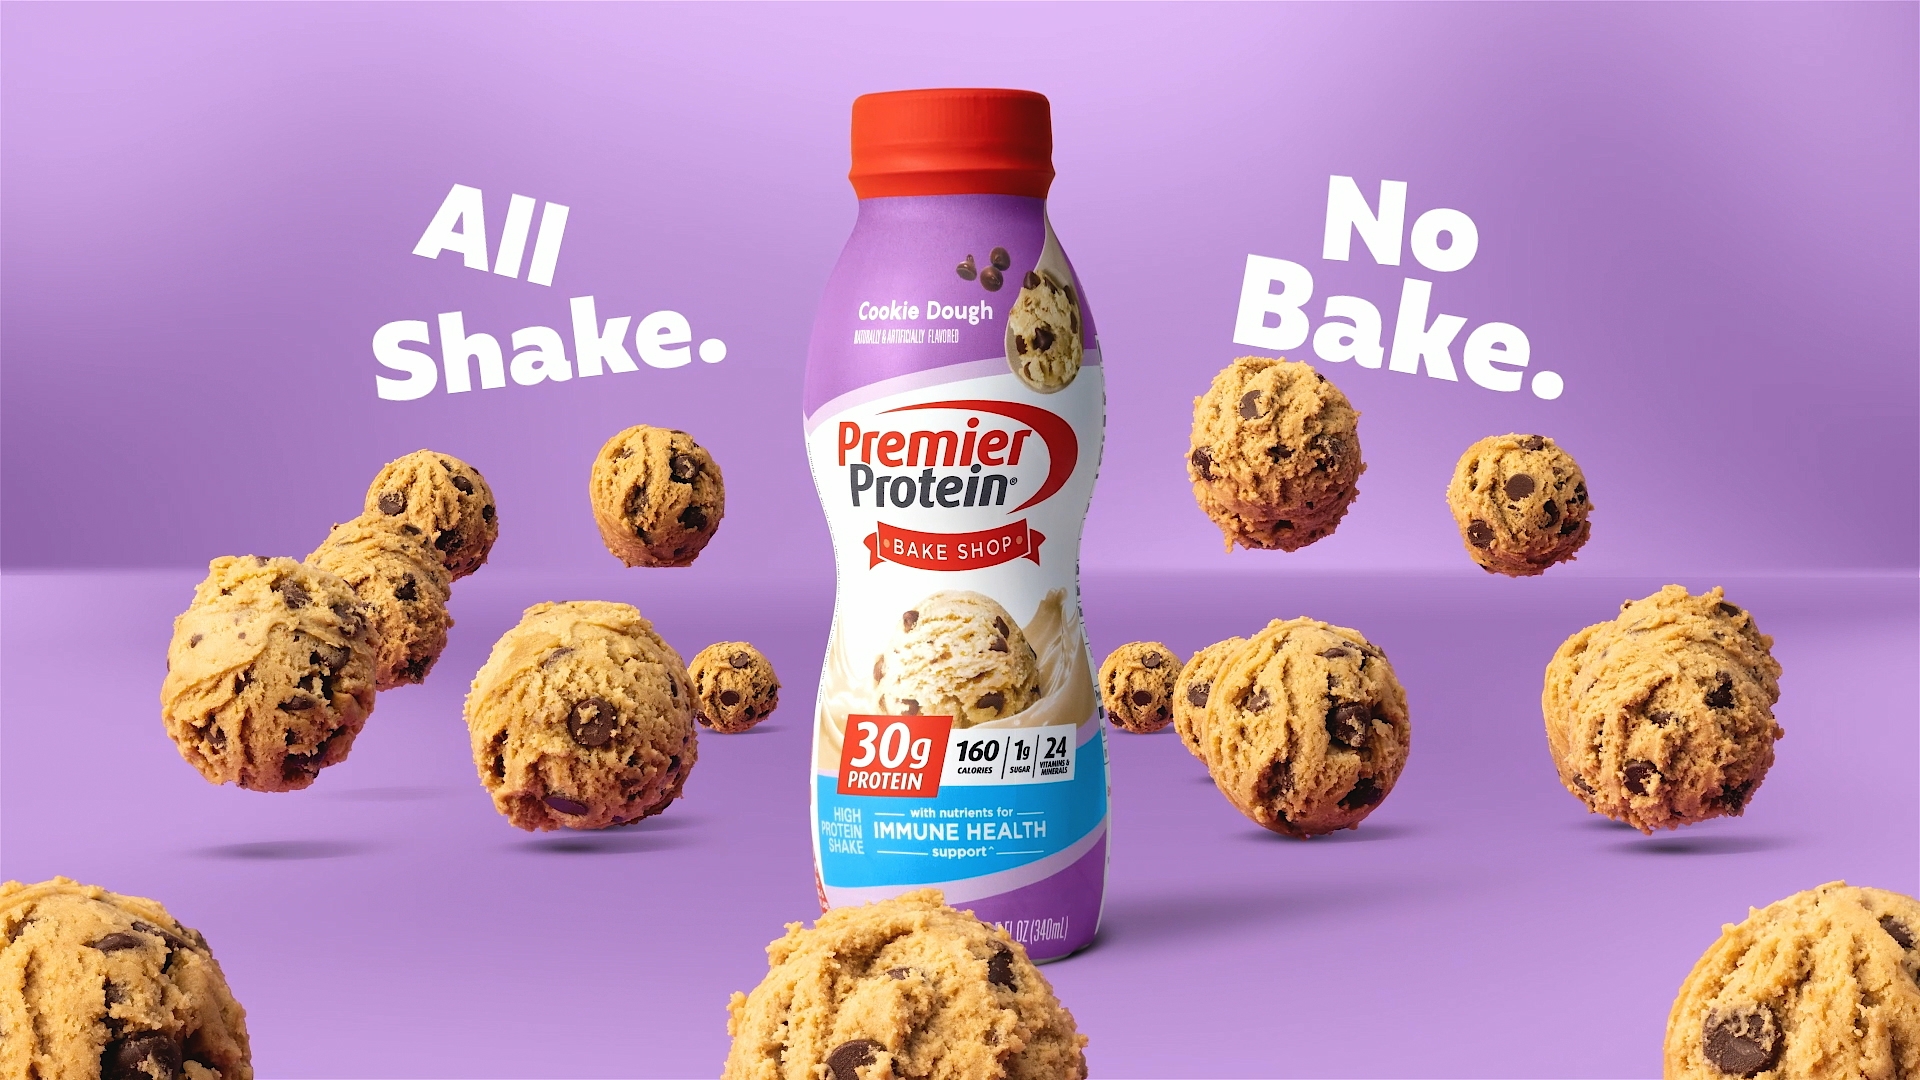 Video Poster: A bottle of Cookie Dough flavor Premier Protein shake with text reading 'All Shake. No Bake.'